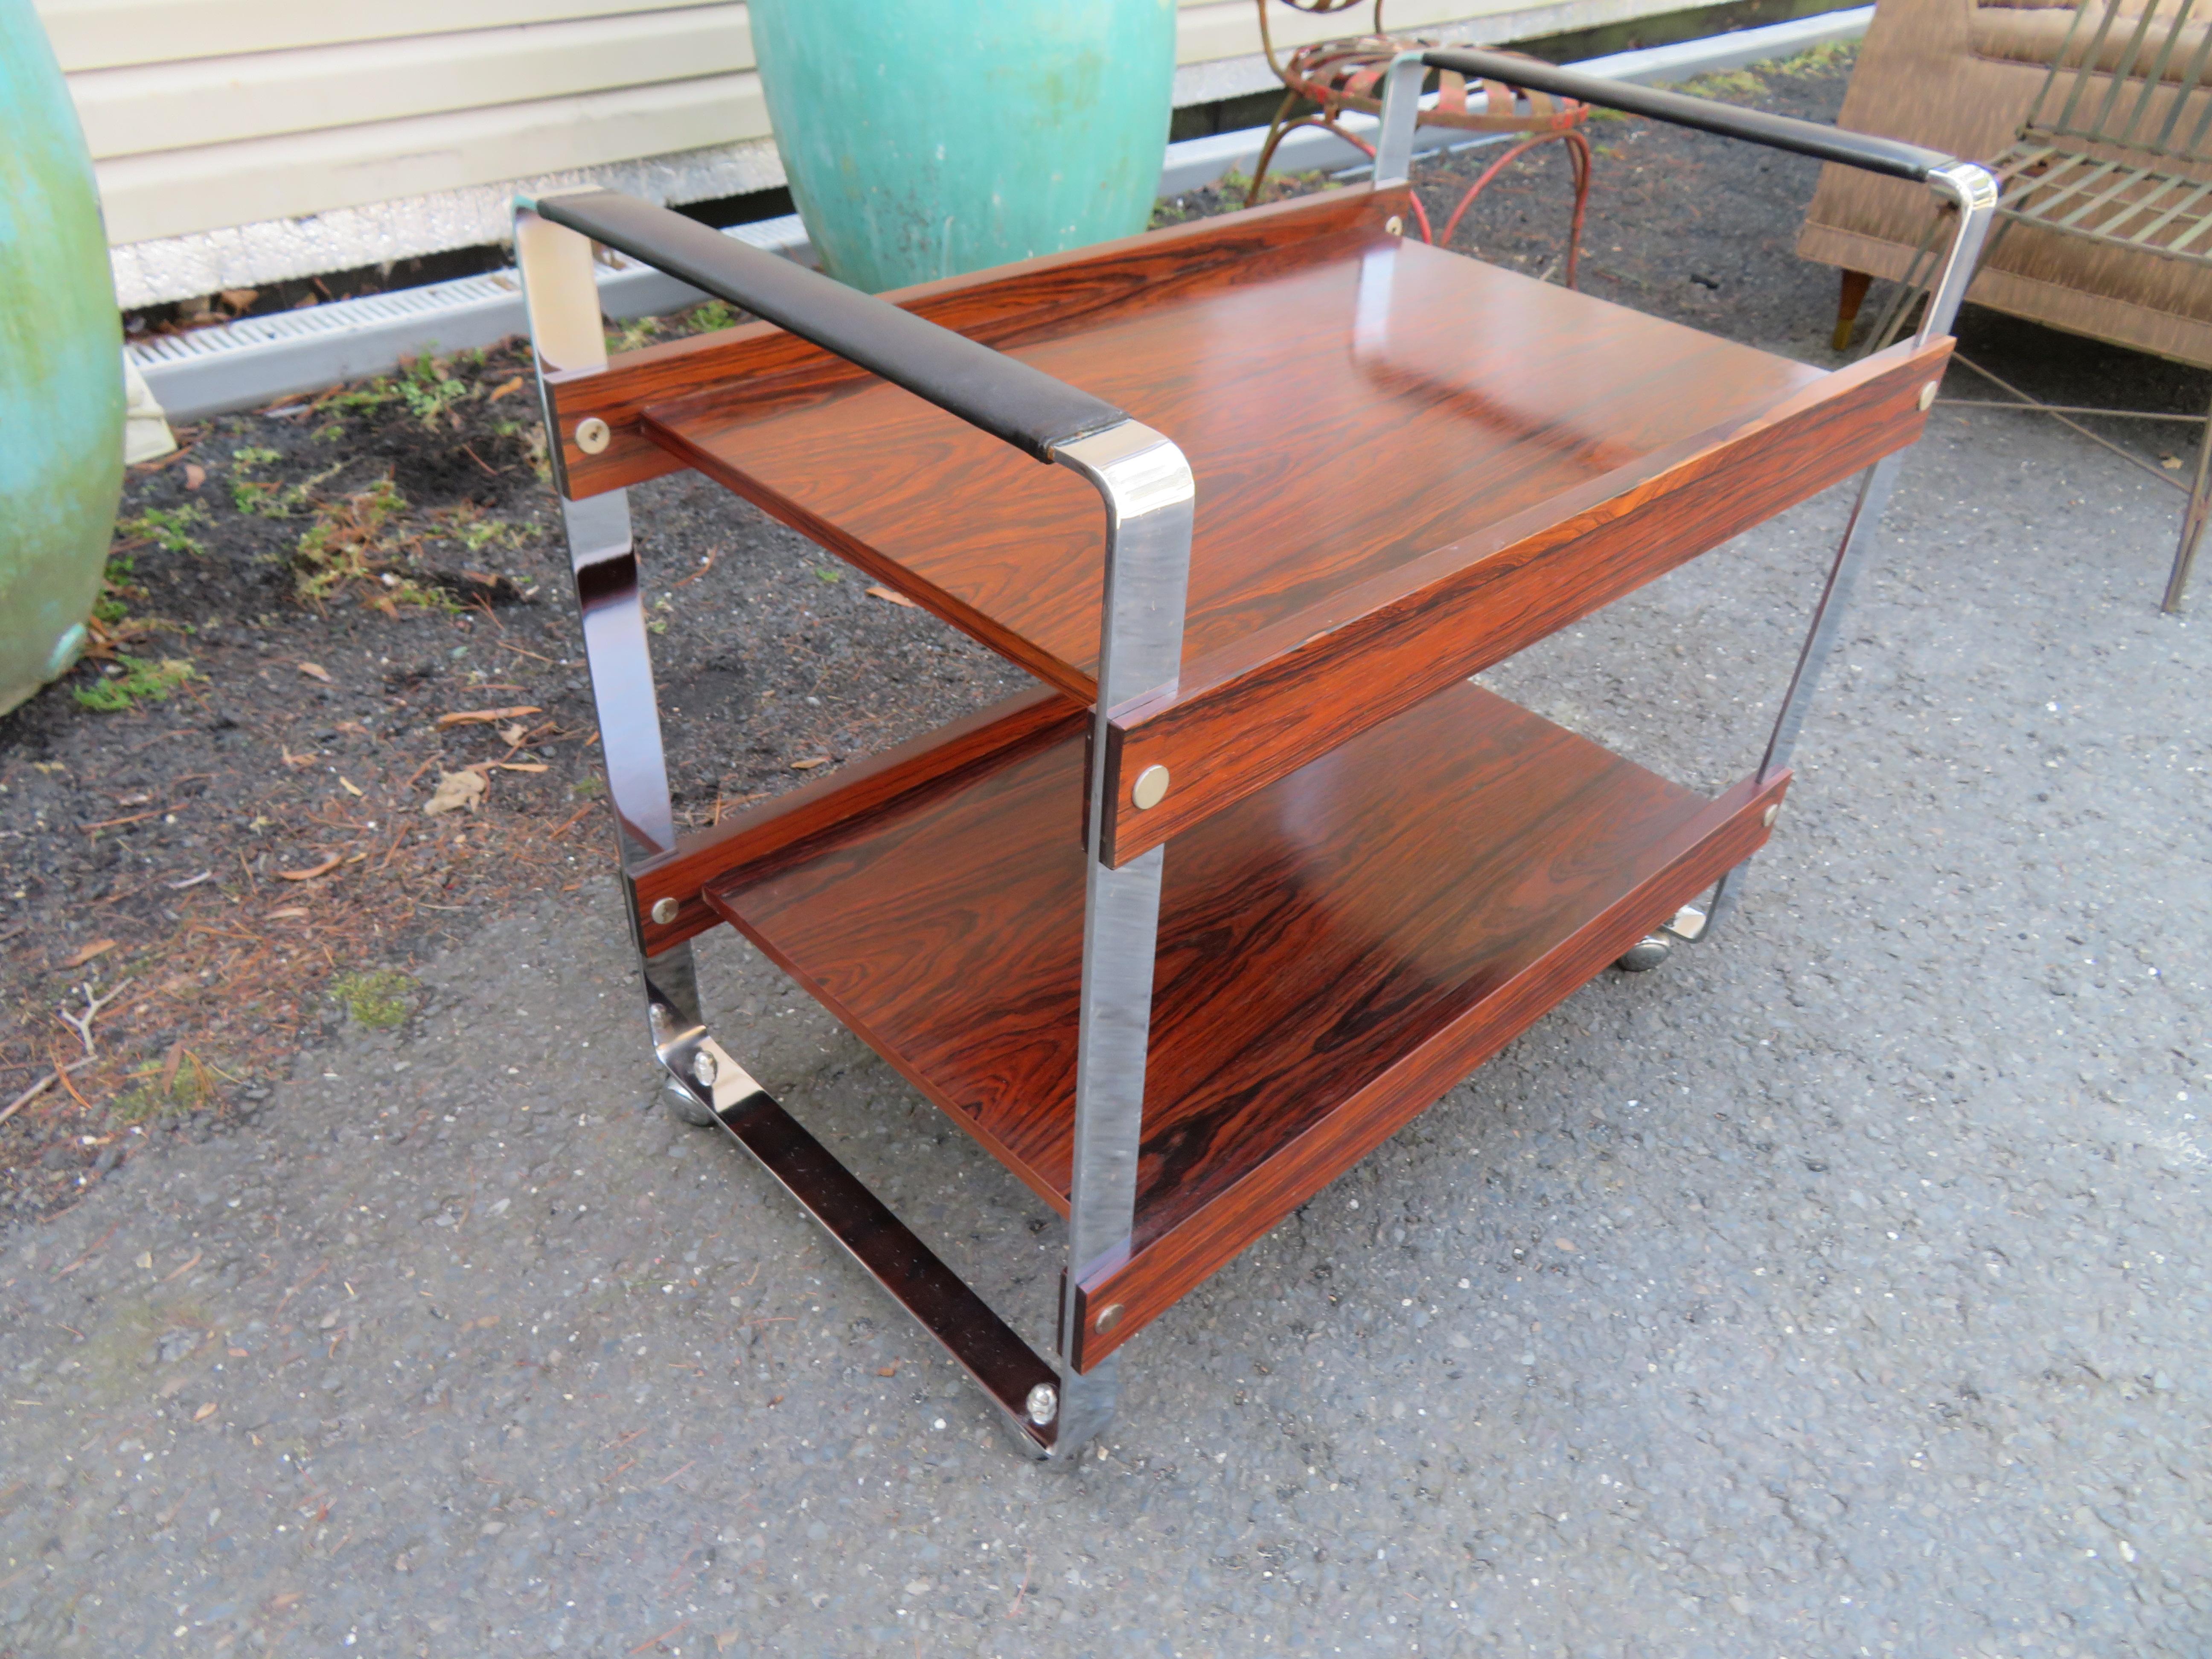 Stunning Rosewood and Chrome Rolling Bar Cart Richard Young Mid-Century Modern In Good Condition For Sale In Pemberton, NJ